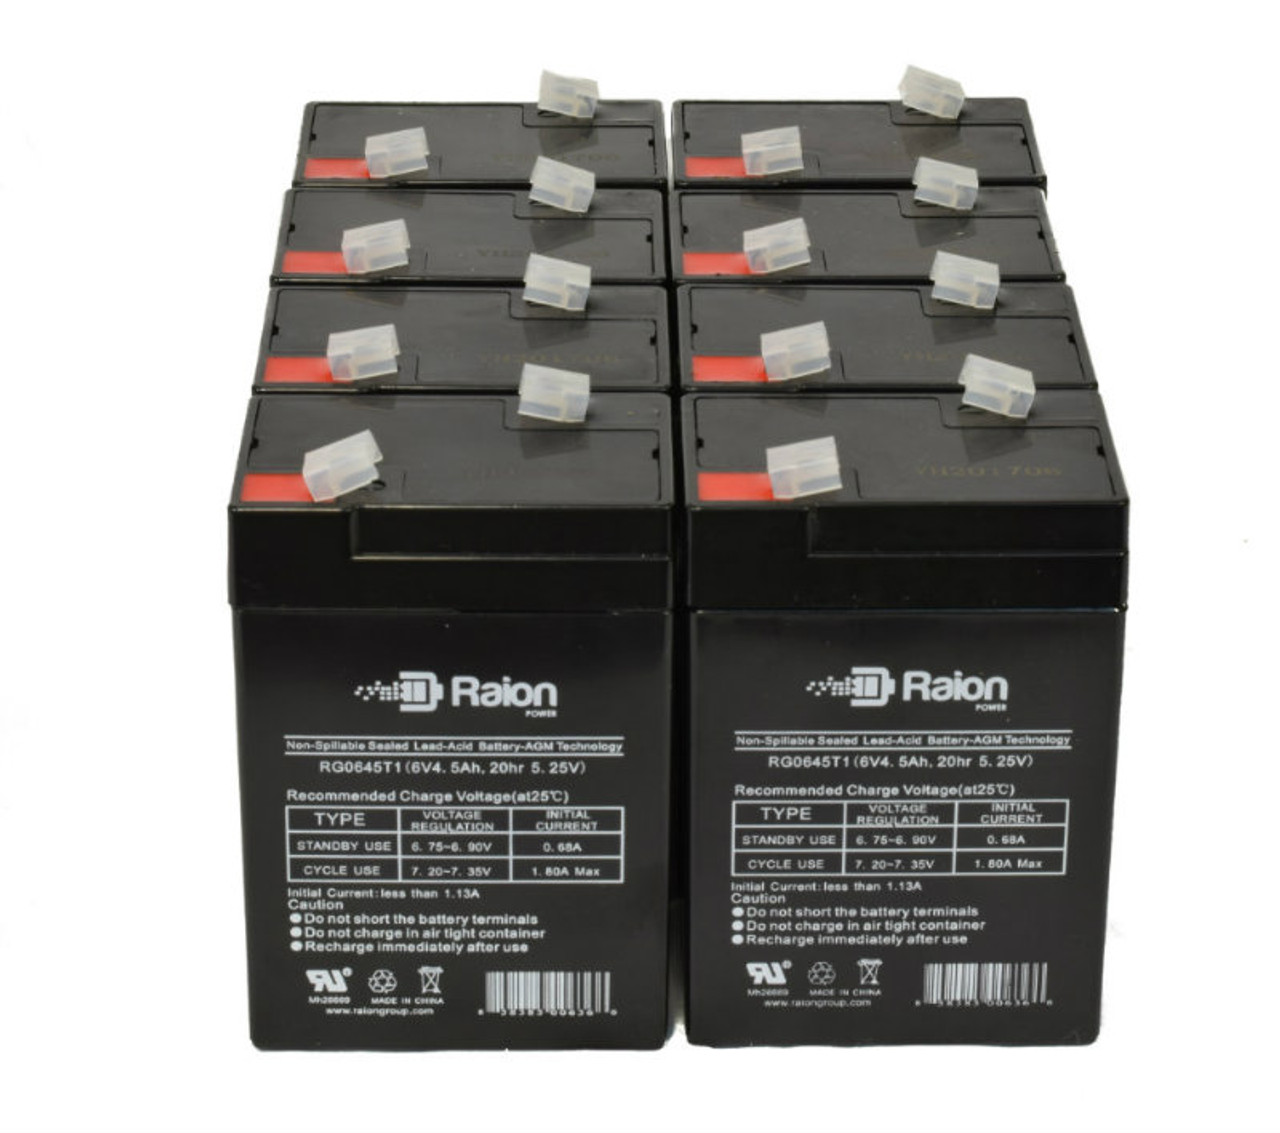 Raion Power 6 Volt 4.5Ah RG0645T1 Replacement Battery for Starlight SA6-5 - 8 Pack